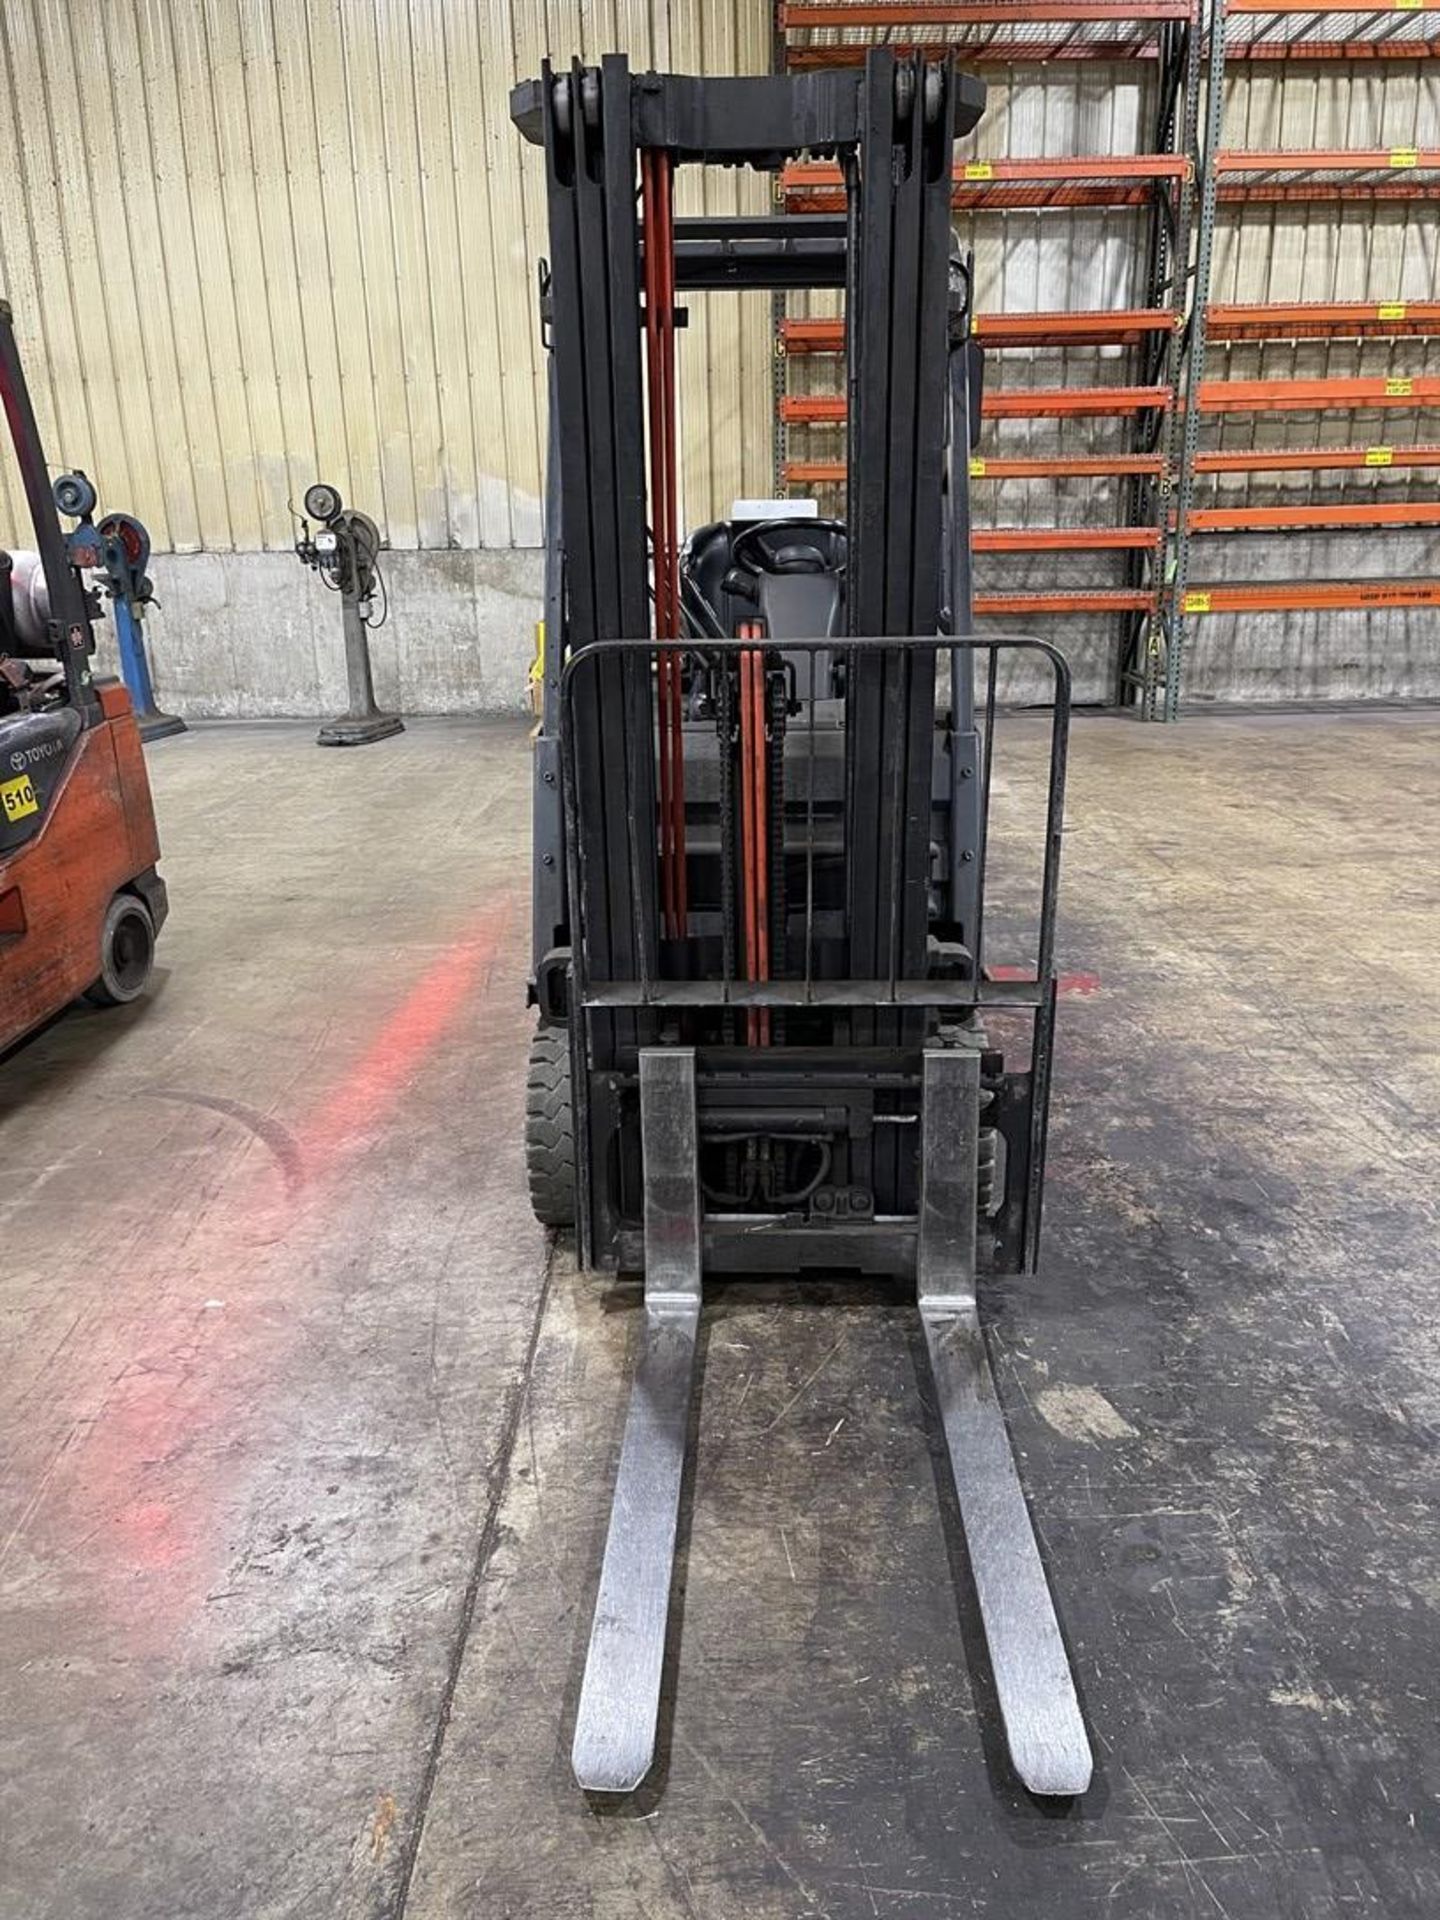 TOYOTA 8FGCSU20 LP Forklift, s/n 13417, 4,000 Lb. Capacity, Side Shift, 3-Stage Mast, Cushion Tire - Image 2 of 8